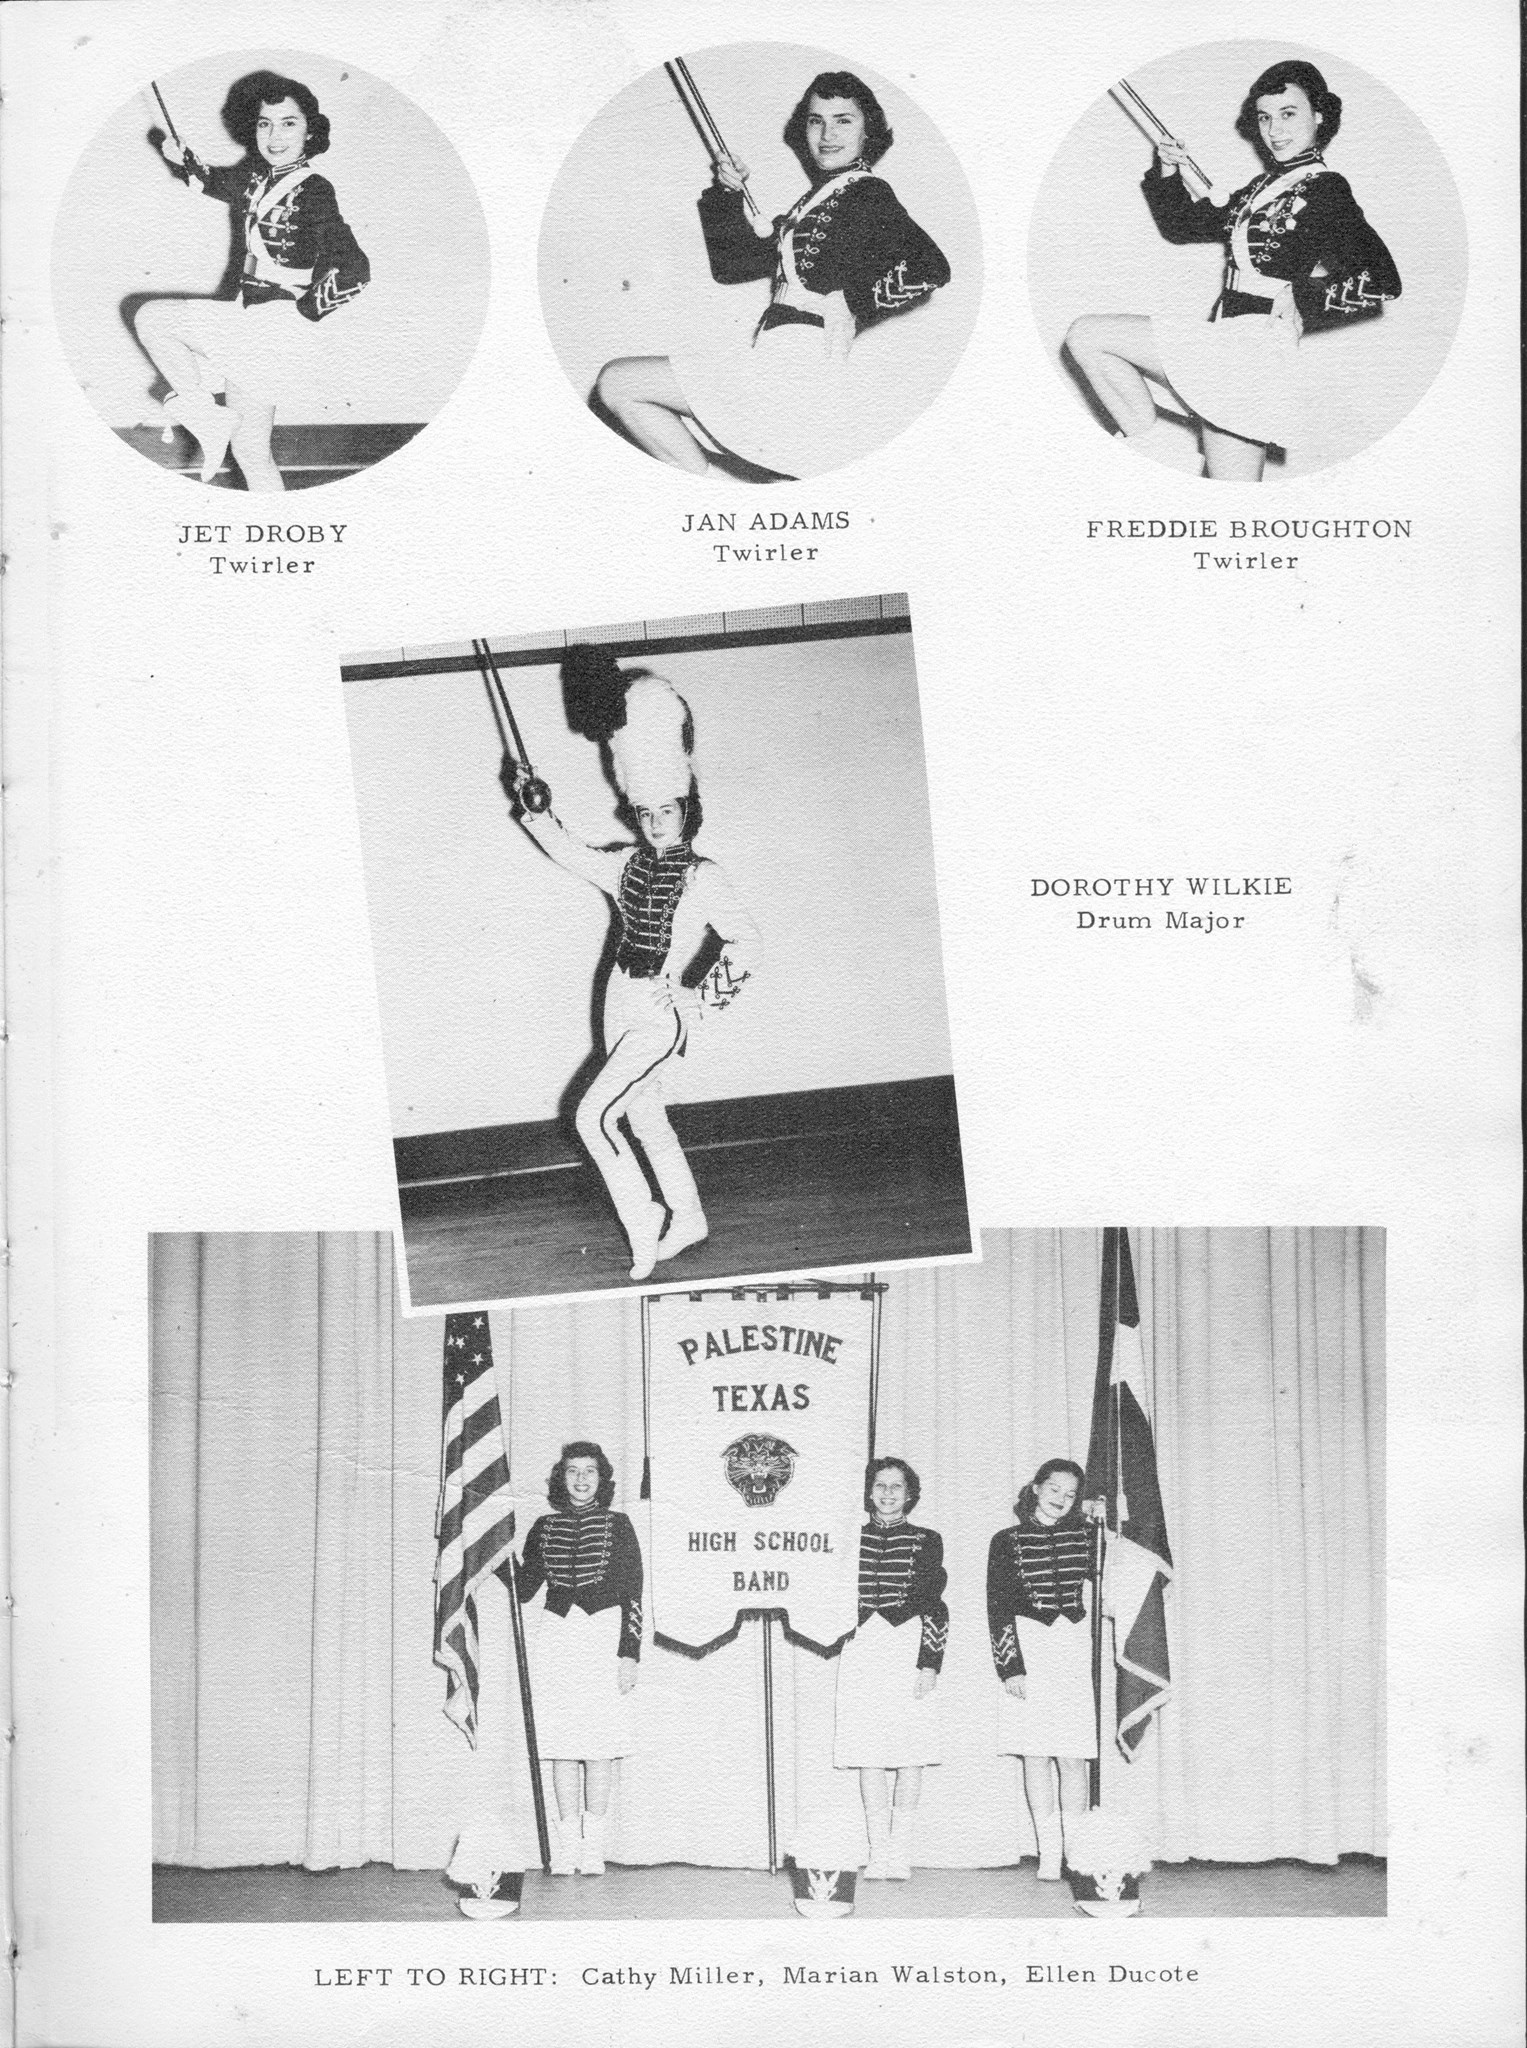 ../../../Images/Large/1952/Arclight-1952-pg0073.jpg